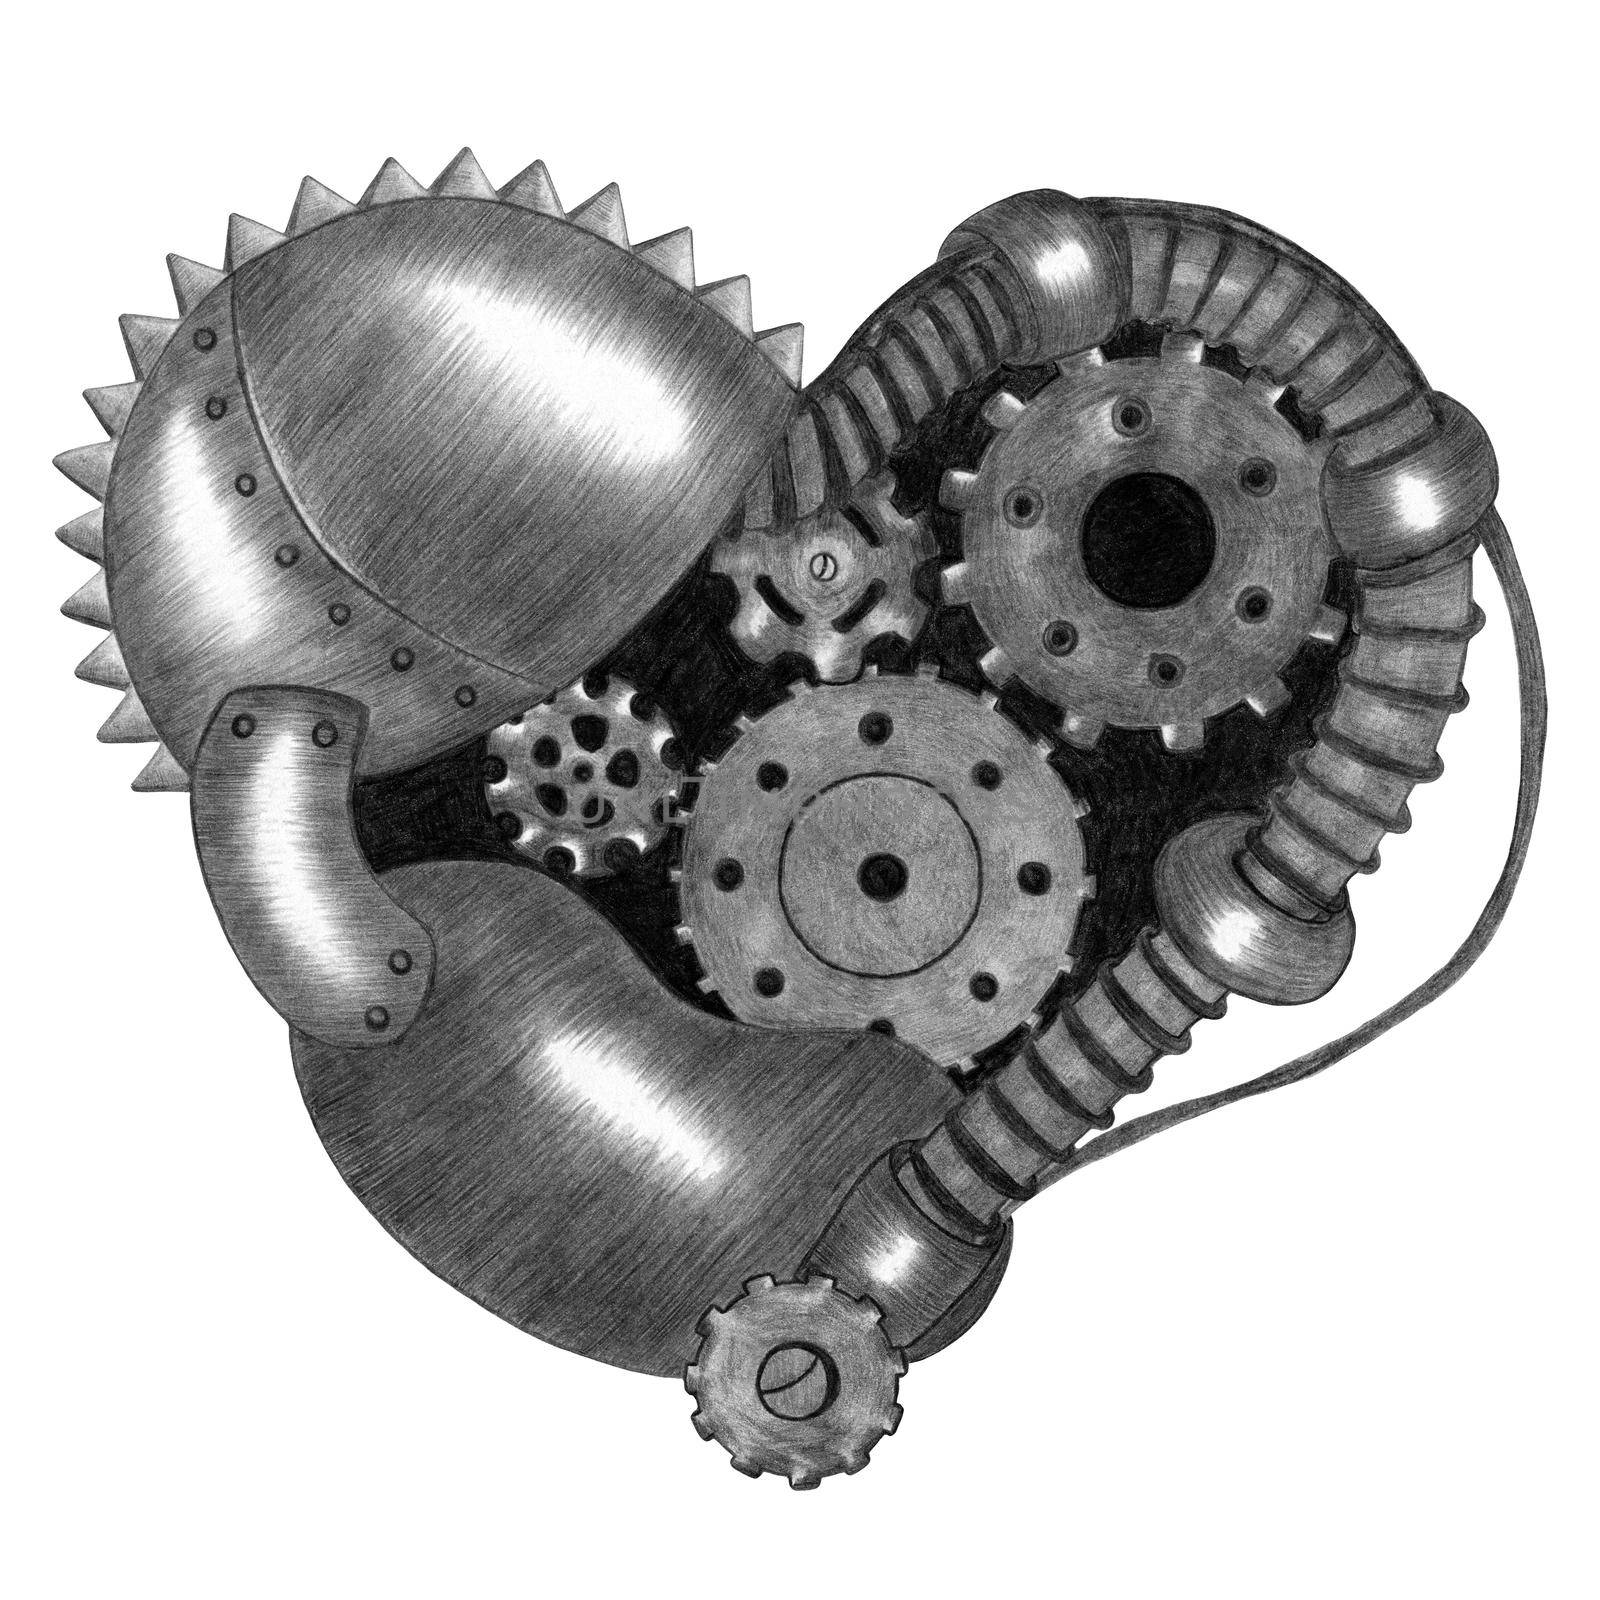 Hand Drawn Illustration of Black and White Steampunk Heart in Gray Colors on White Background. Steampunk Heart Design Element Drawn by Pencil.